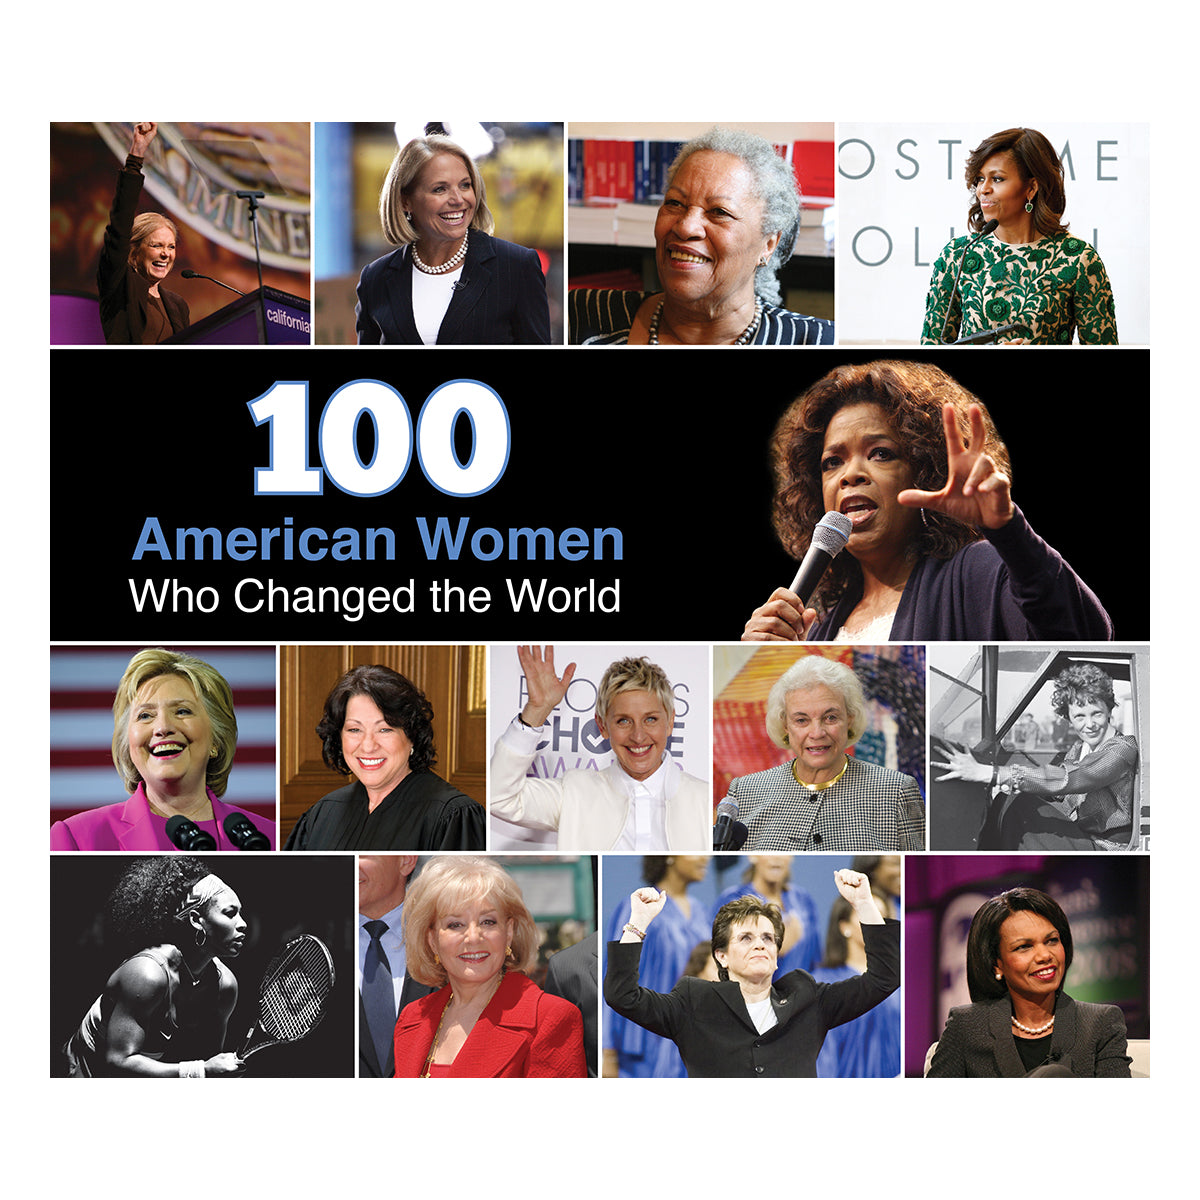 100 American Women Who Changed the World